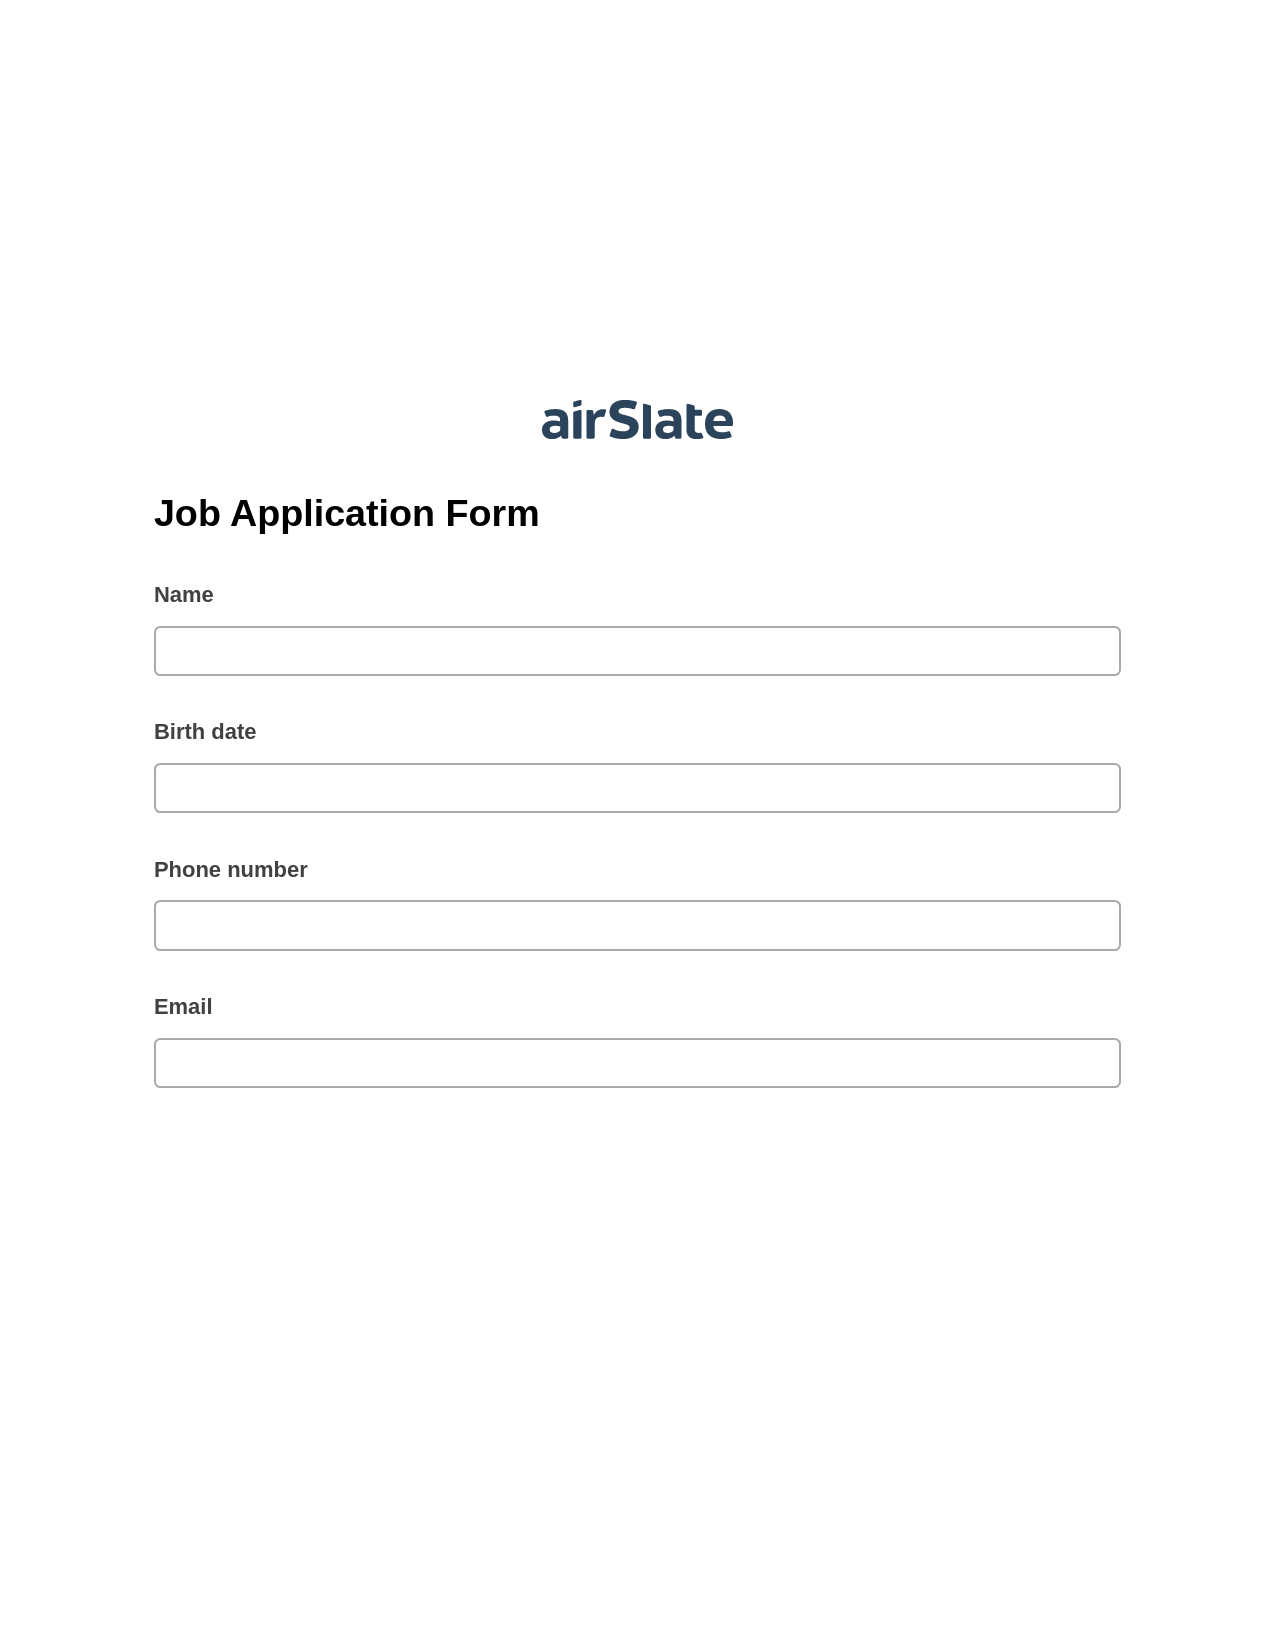 Job Application Form Pre-fill from CSV File Dropdown Options Bot, Update NetSuite Records Bot, Google Drive Bot